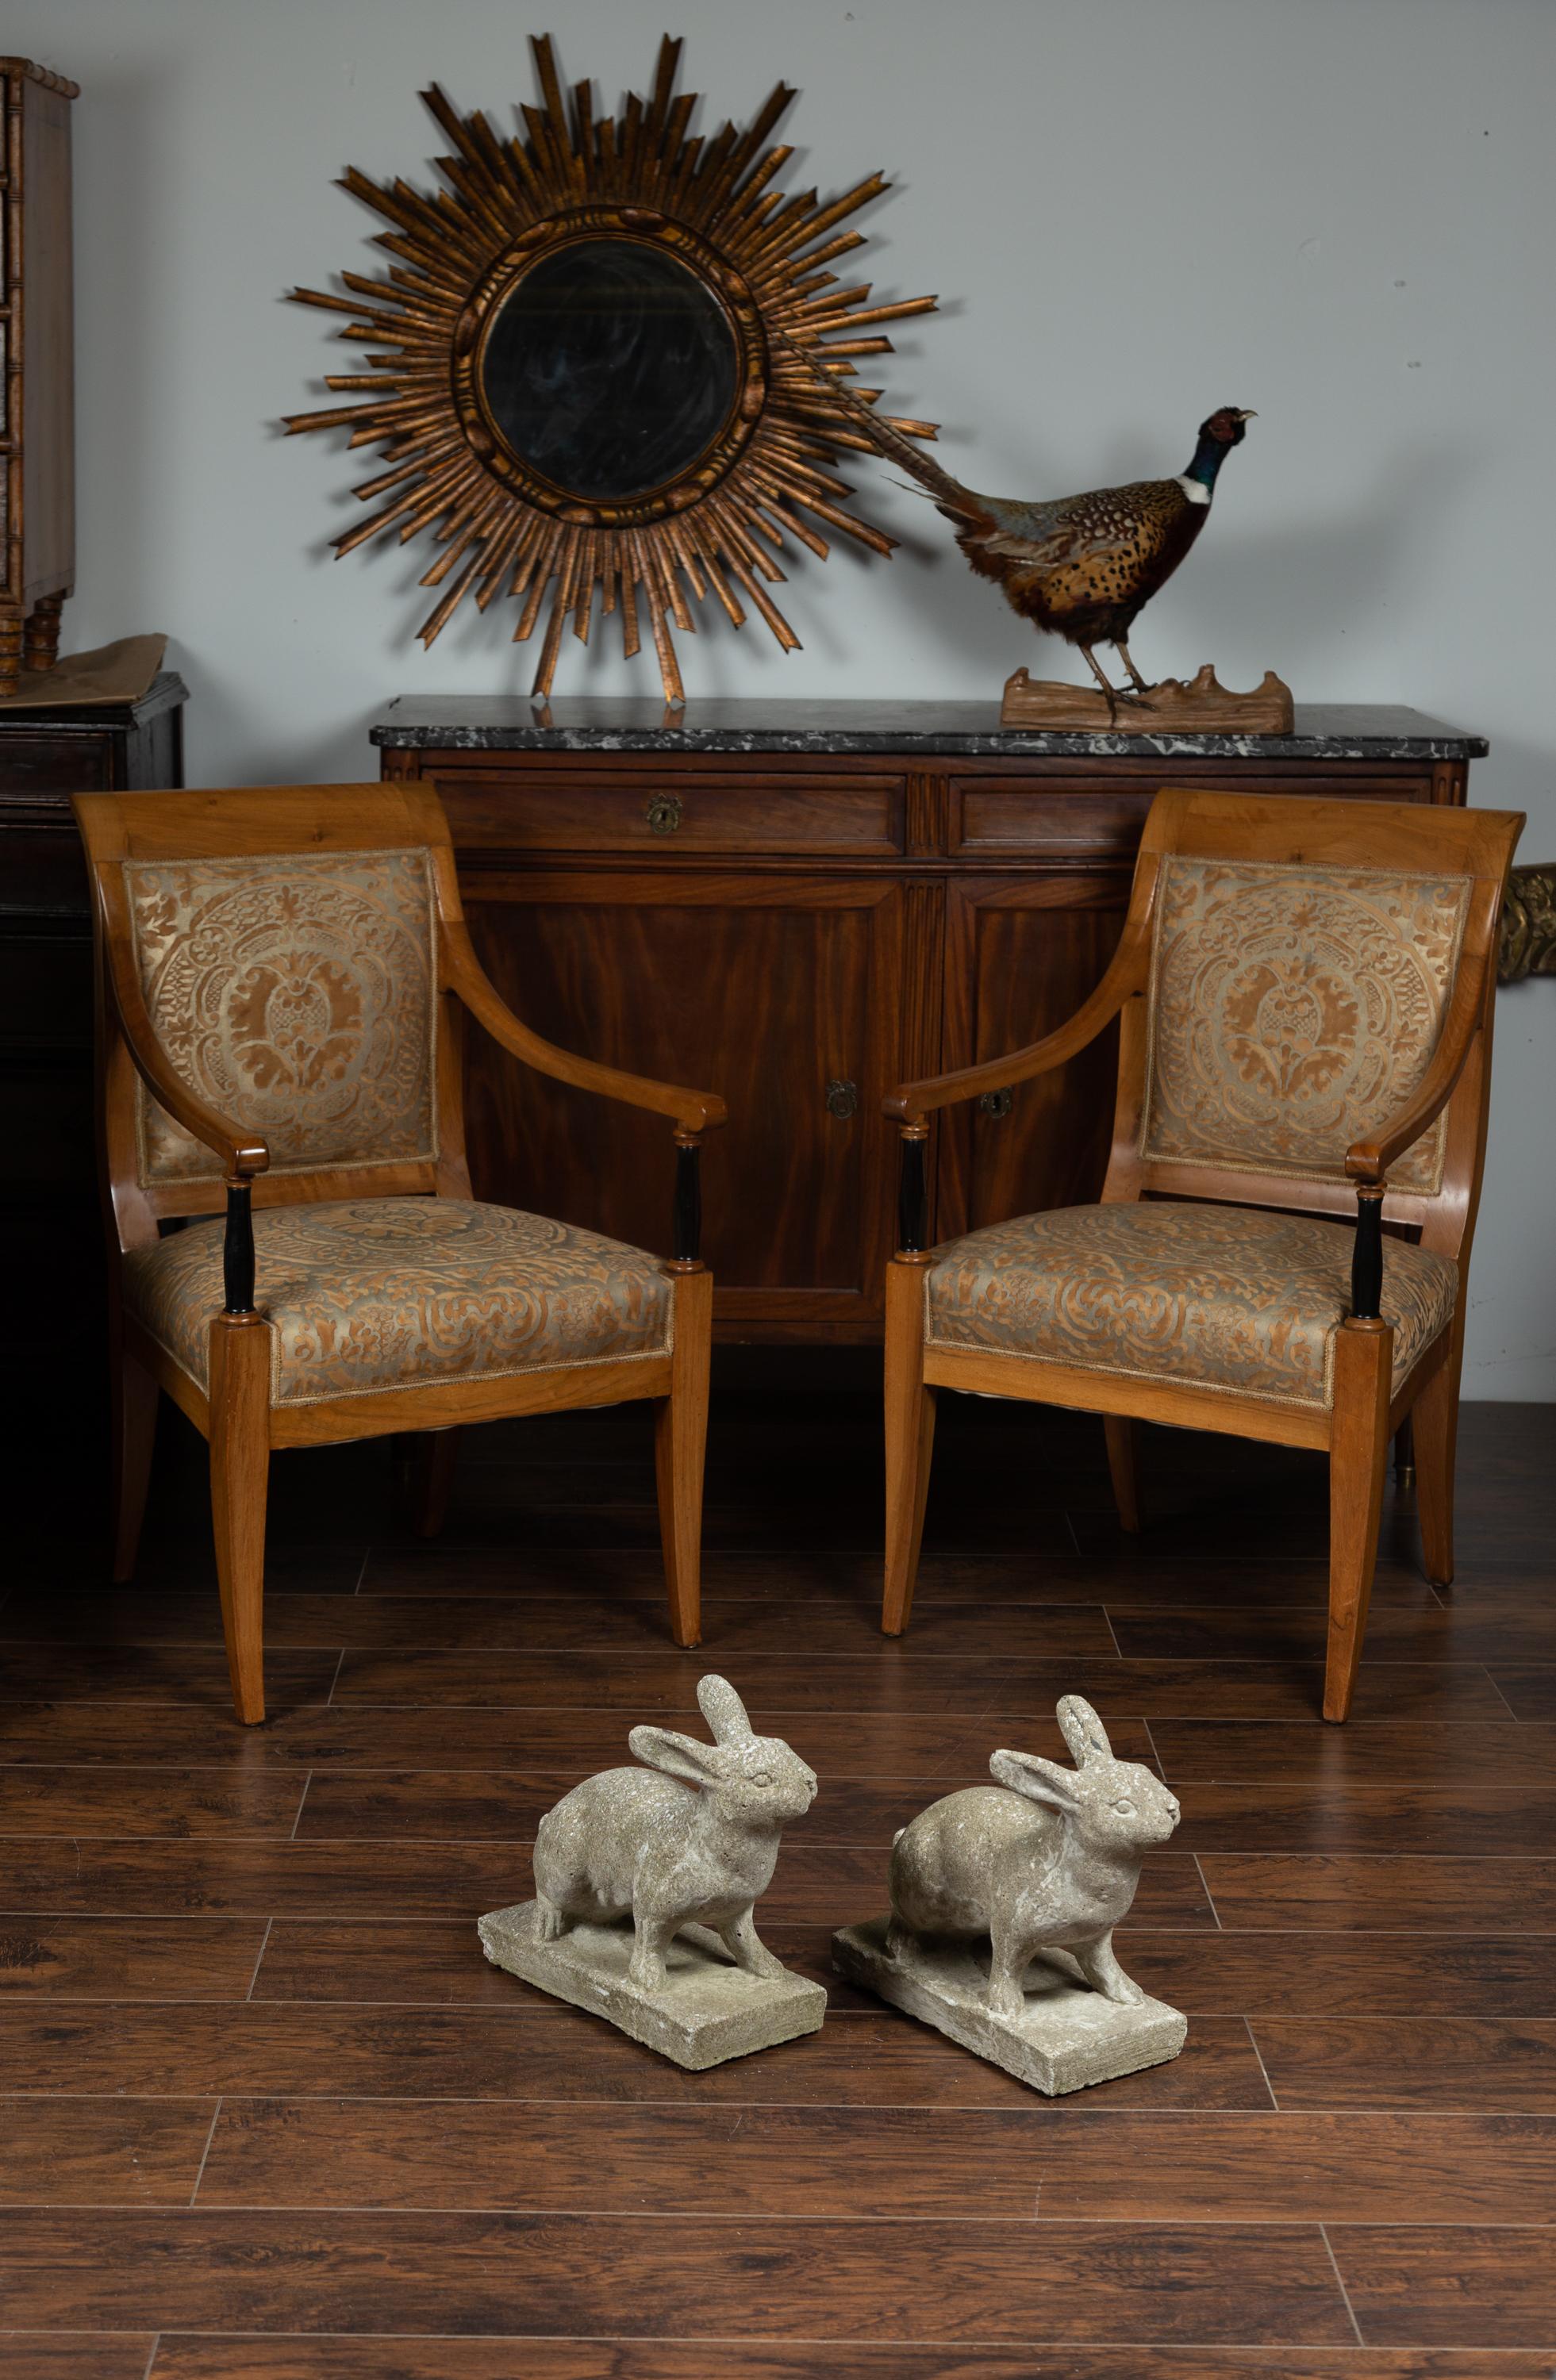 A pair of vintage English concrete rabbit sculptures from the mid-20th century on rectangular bases. Born in England during the midcentury period, this pair of concrete sculptures charms us with its lovely subject and nicely weathered appearances.